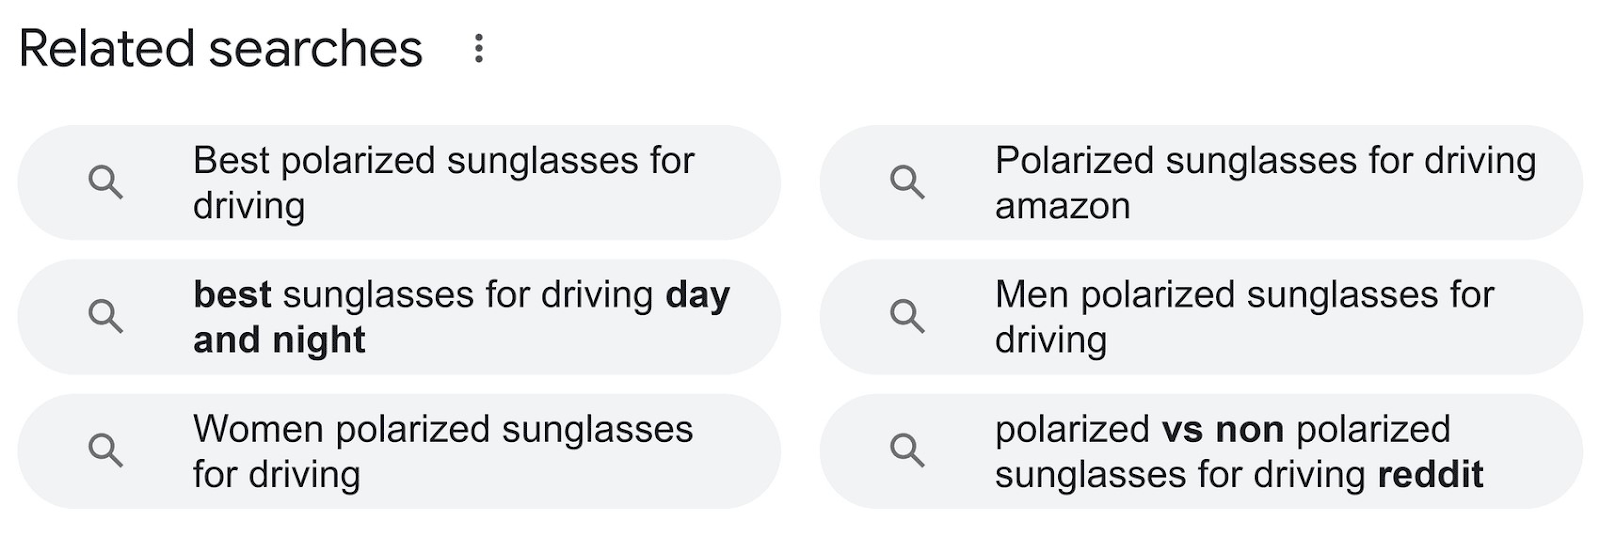 Google's "related searches" section for “polarized sunglasses for driving”